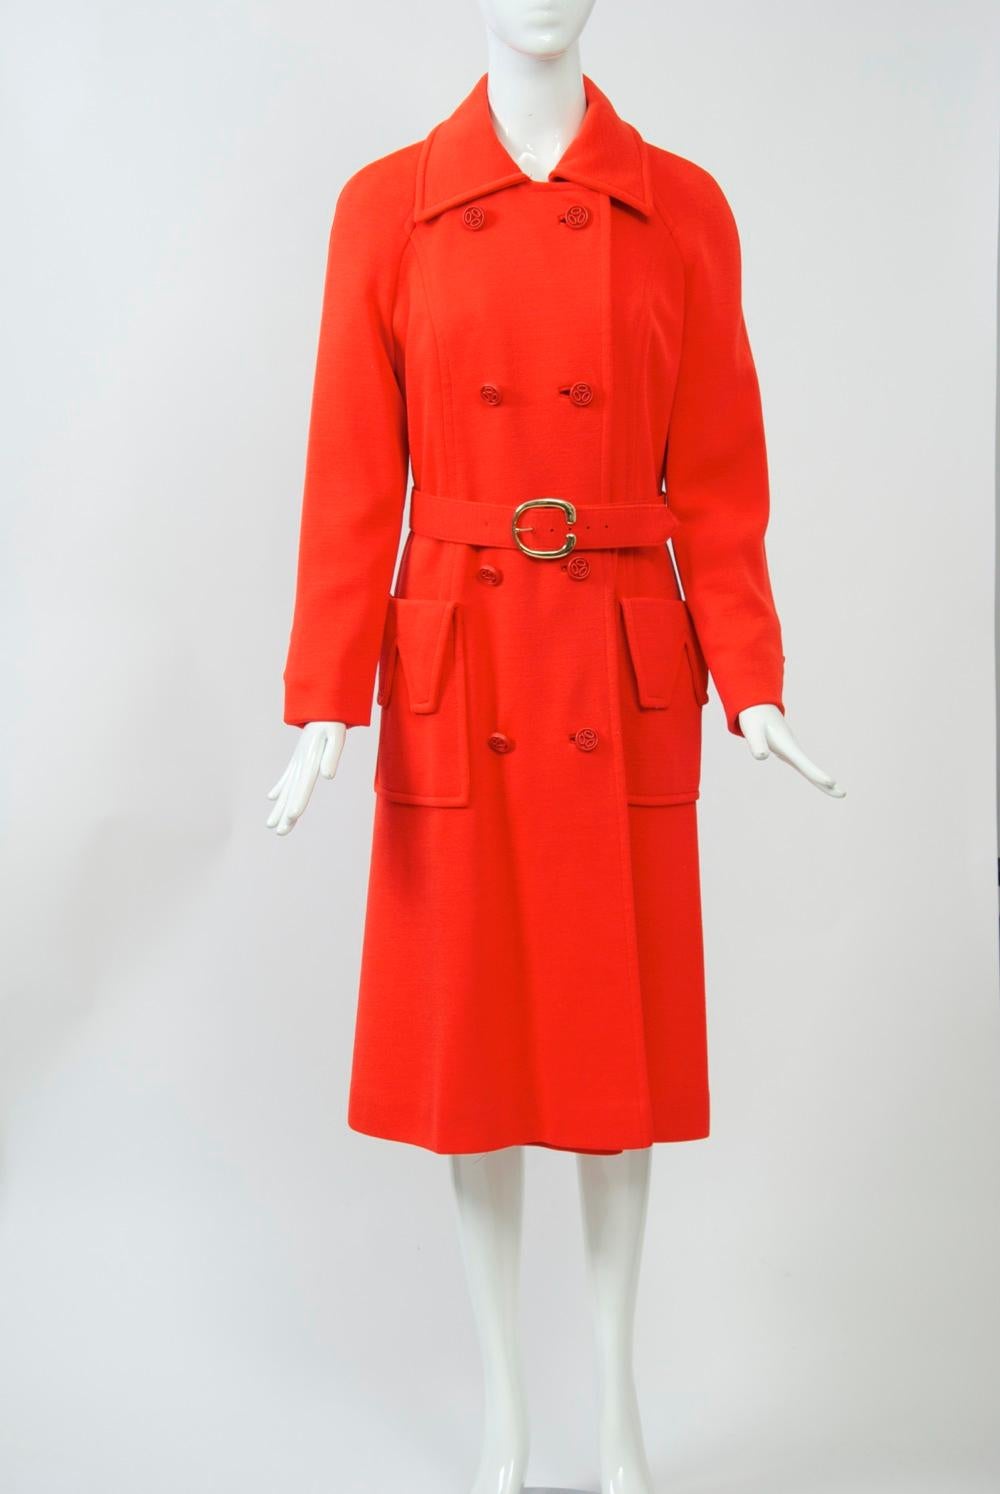 Count Romi specialized in all-weather coats, as well as those suitable for travel. This example, from the early 1970s, is crafted of bright red wool knit and features double-breasted styling, deep patch pockets with cutout flap, and wide self belt.